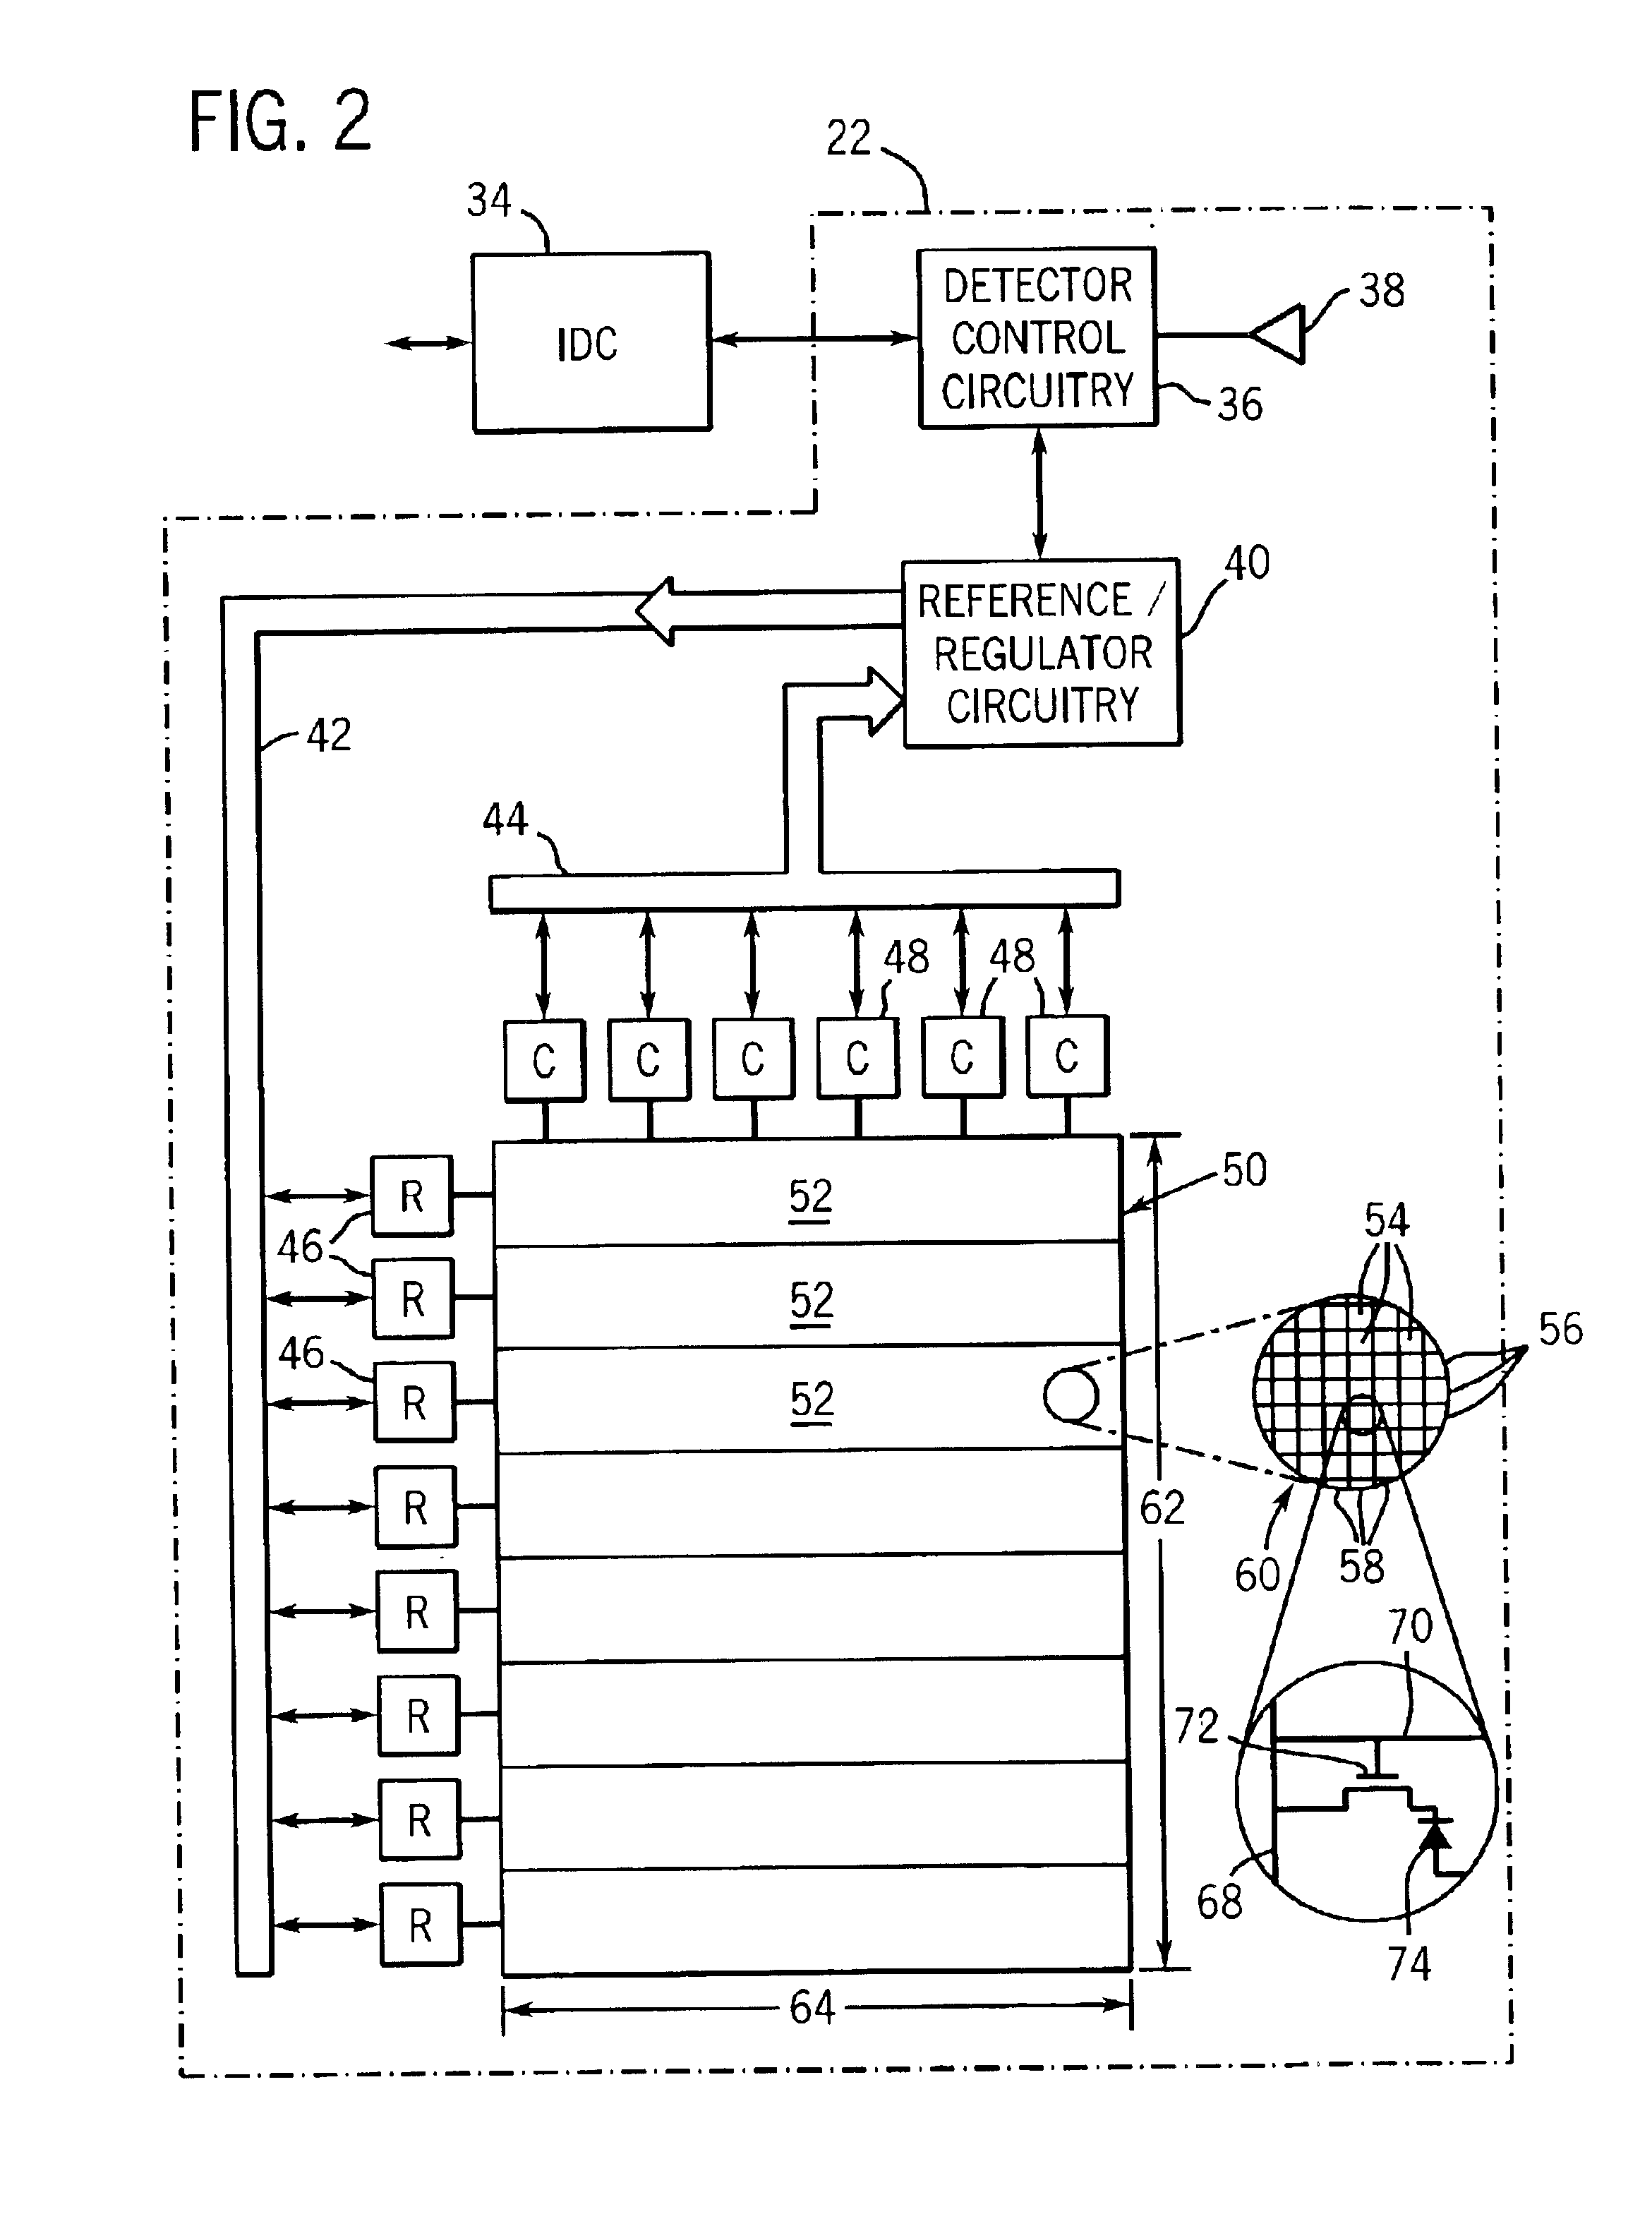 Method and apparatus for selectively attenuating a radiation source